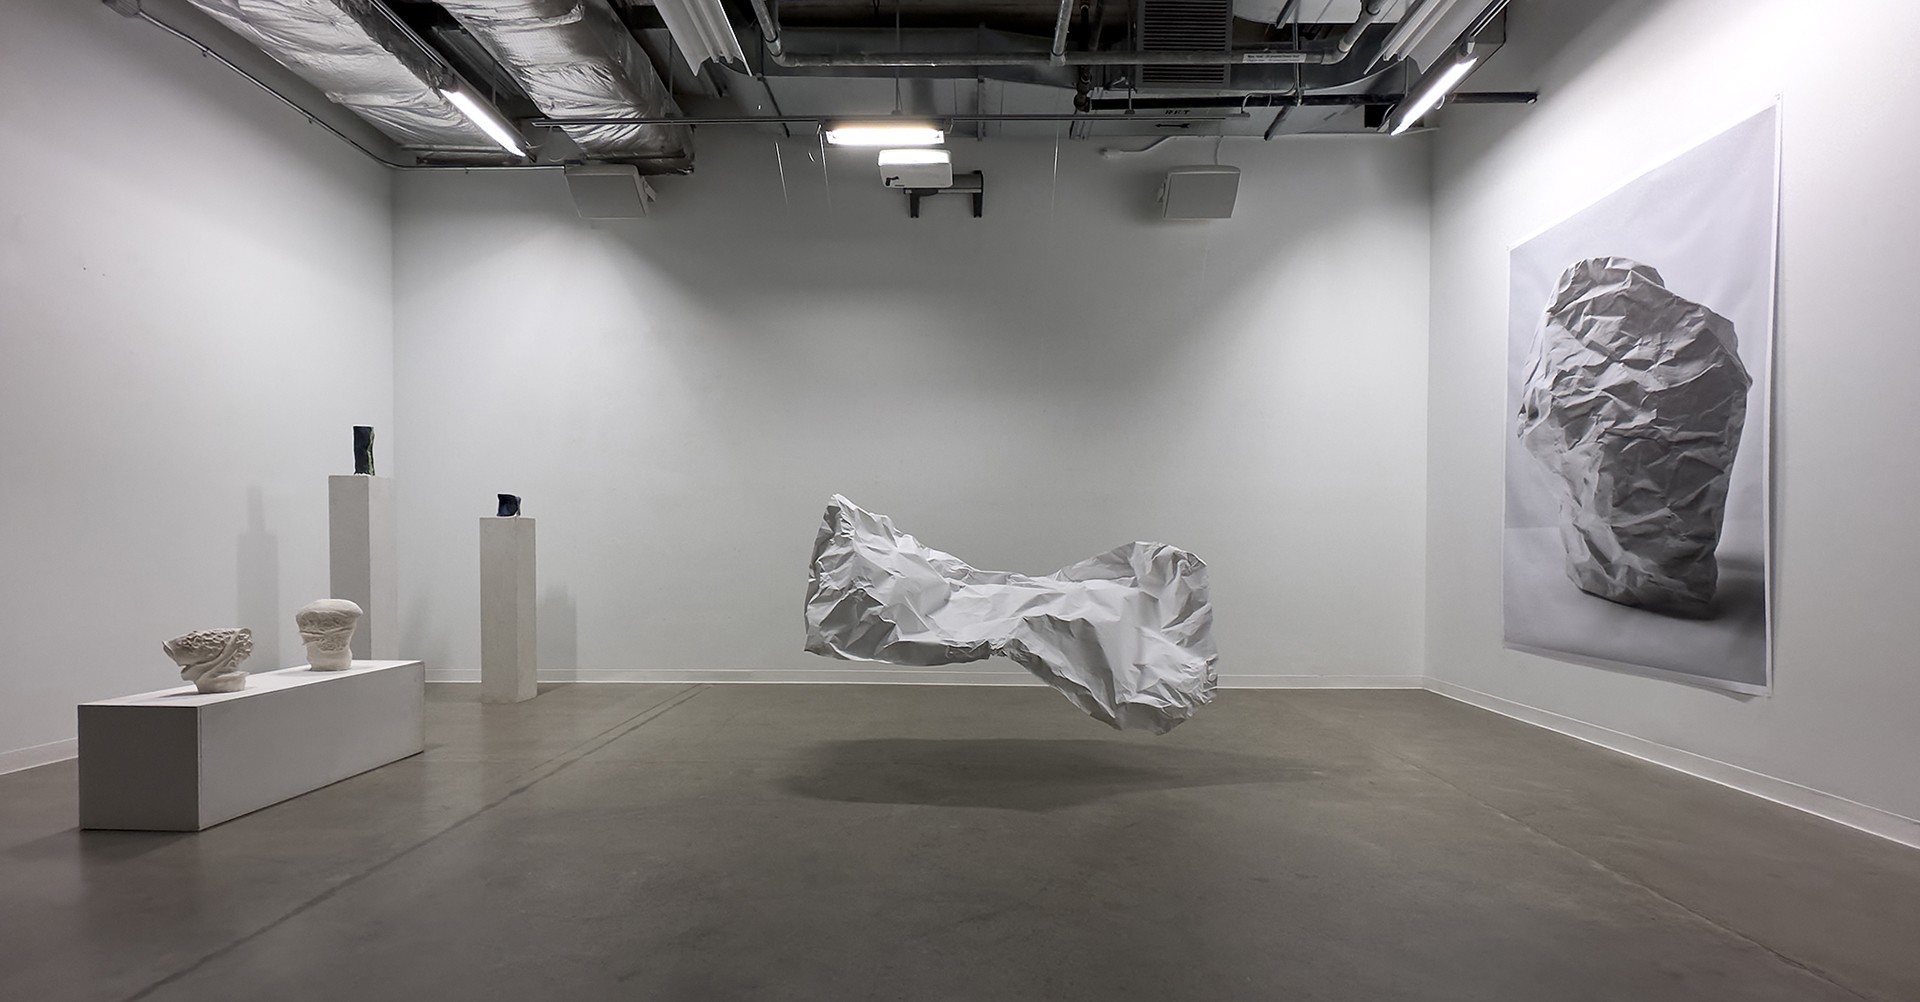 Exhibition installation of artistic pieces — small sculptures and a larger piece shaped like crumpled paper.